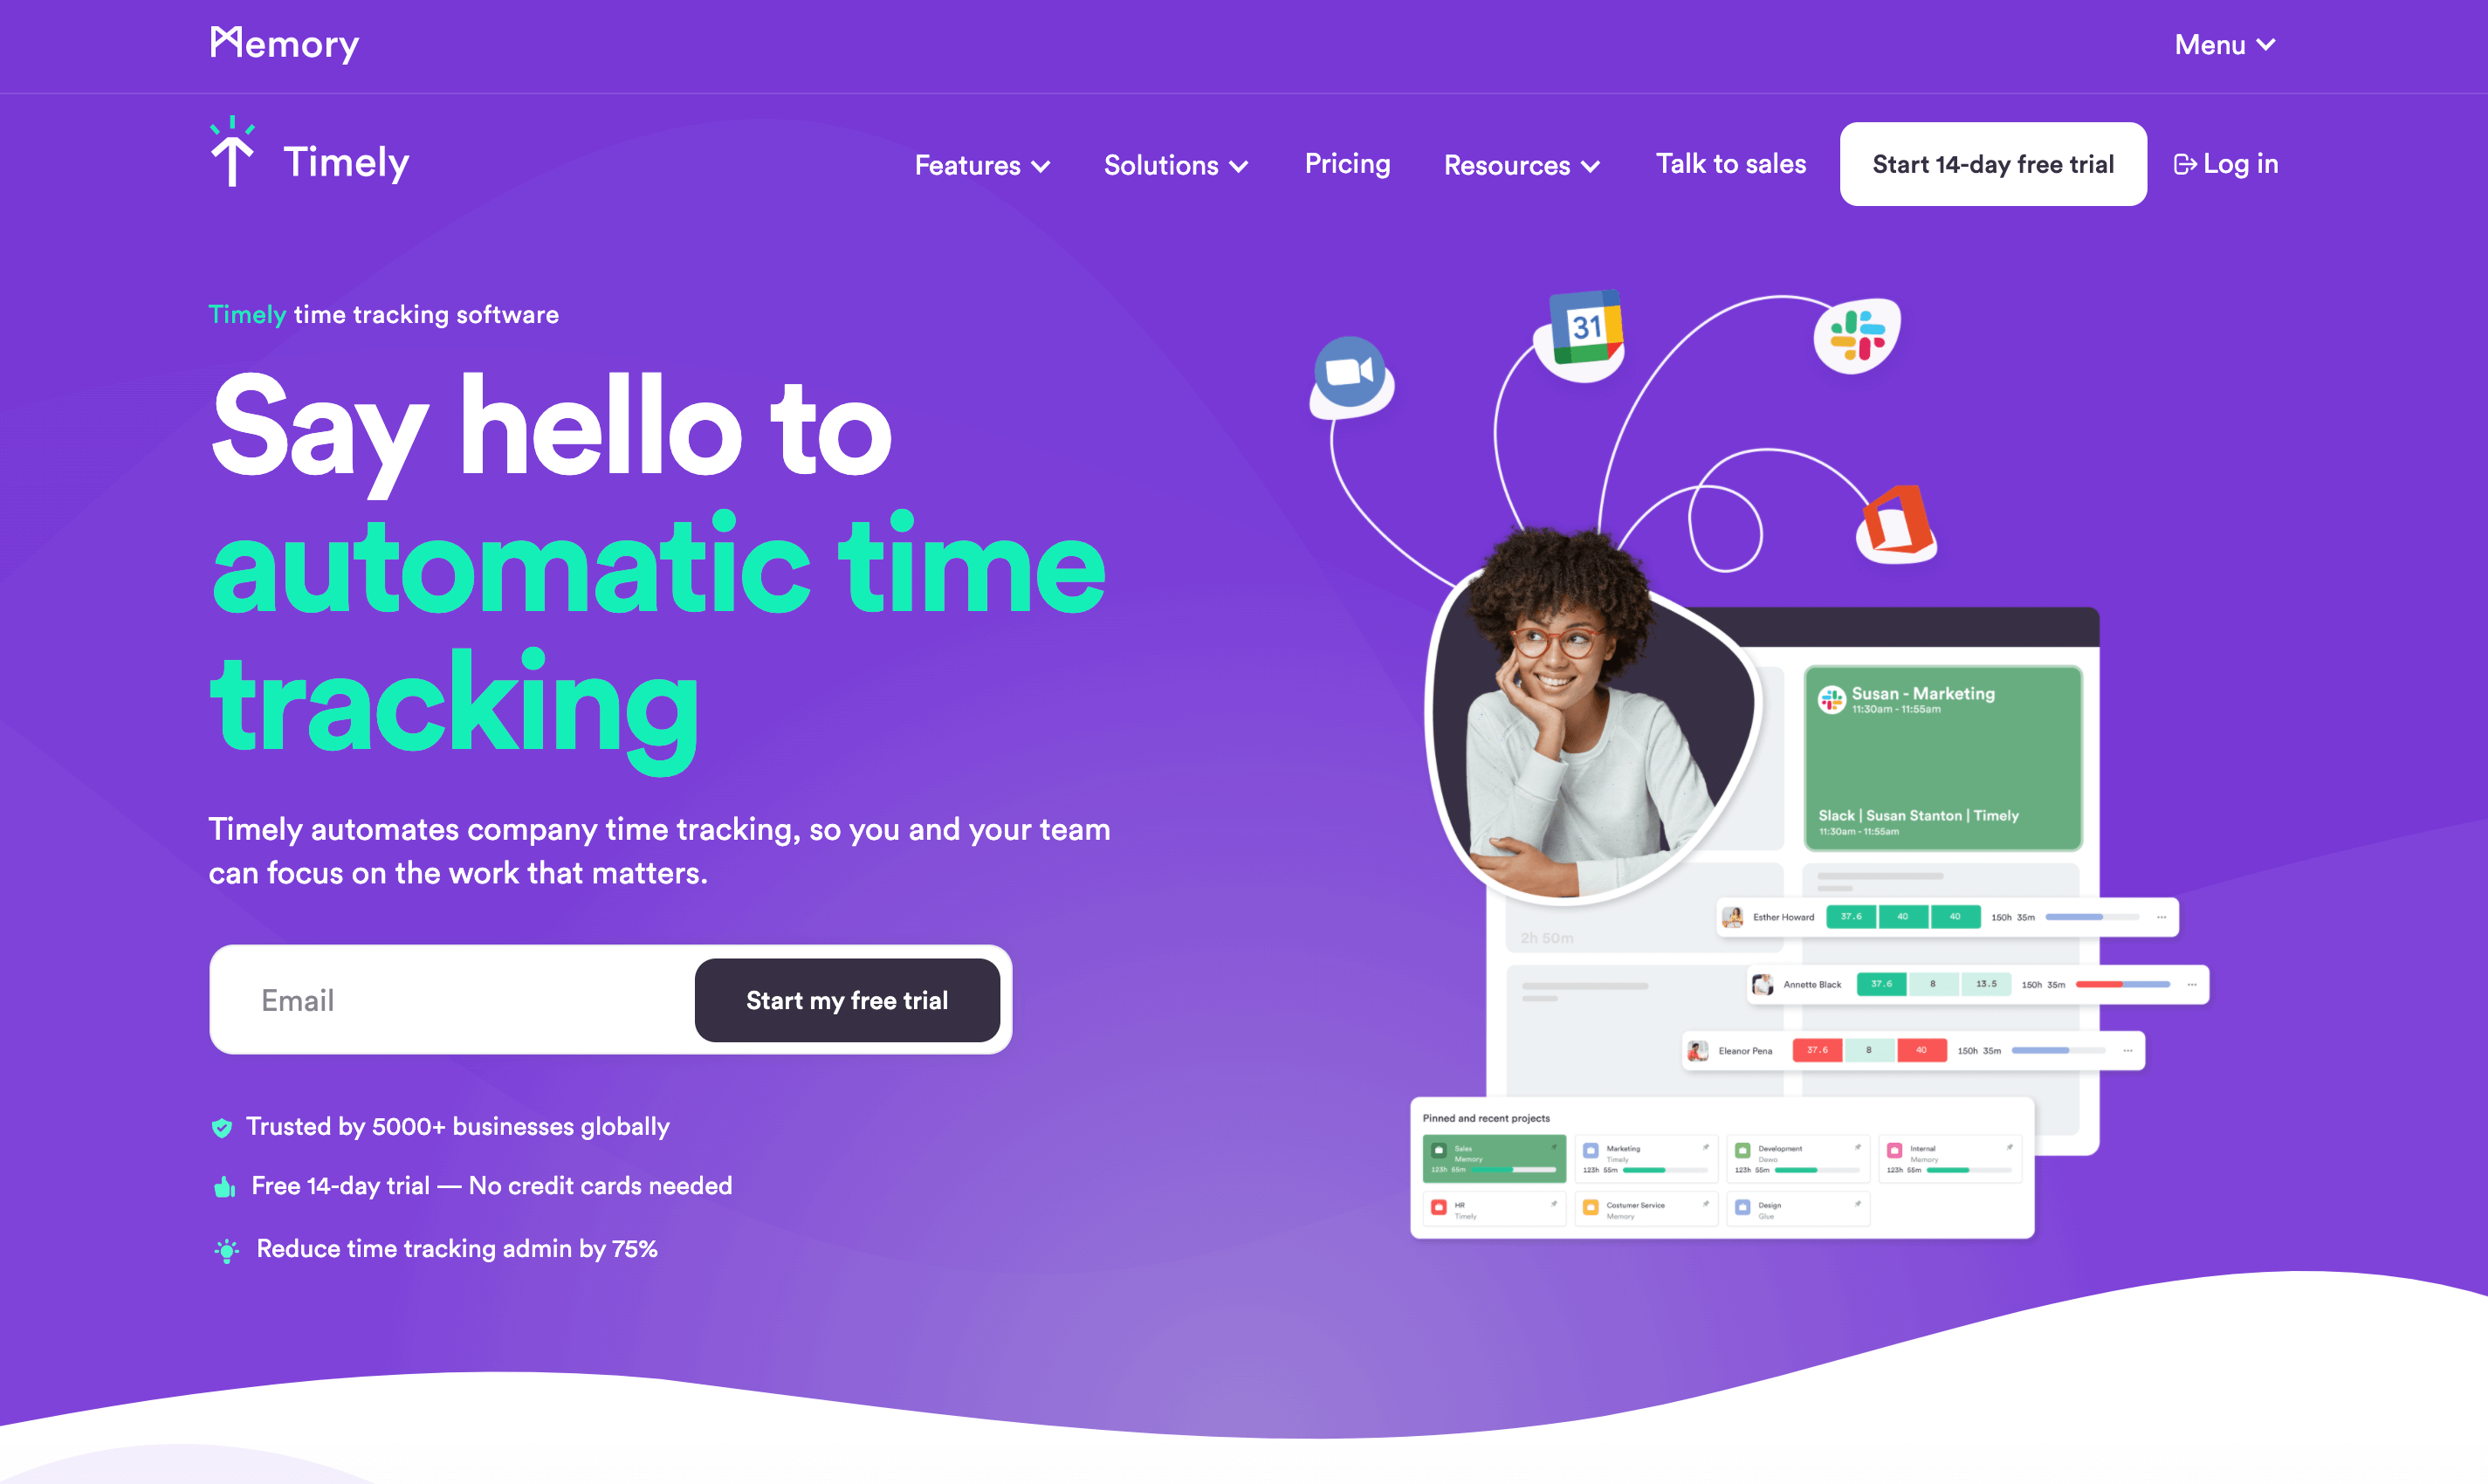 A screenshot of Timely's homepage